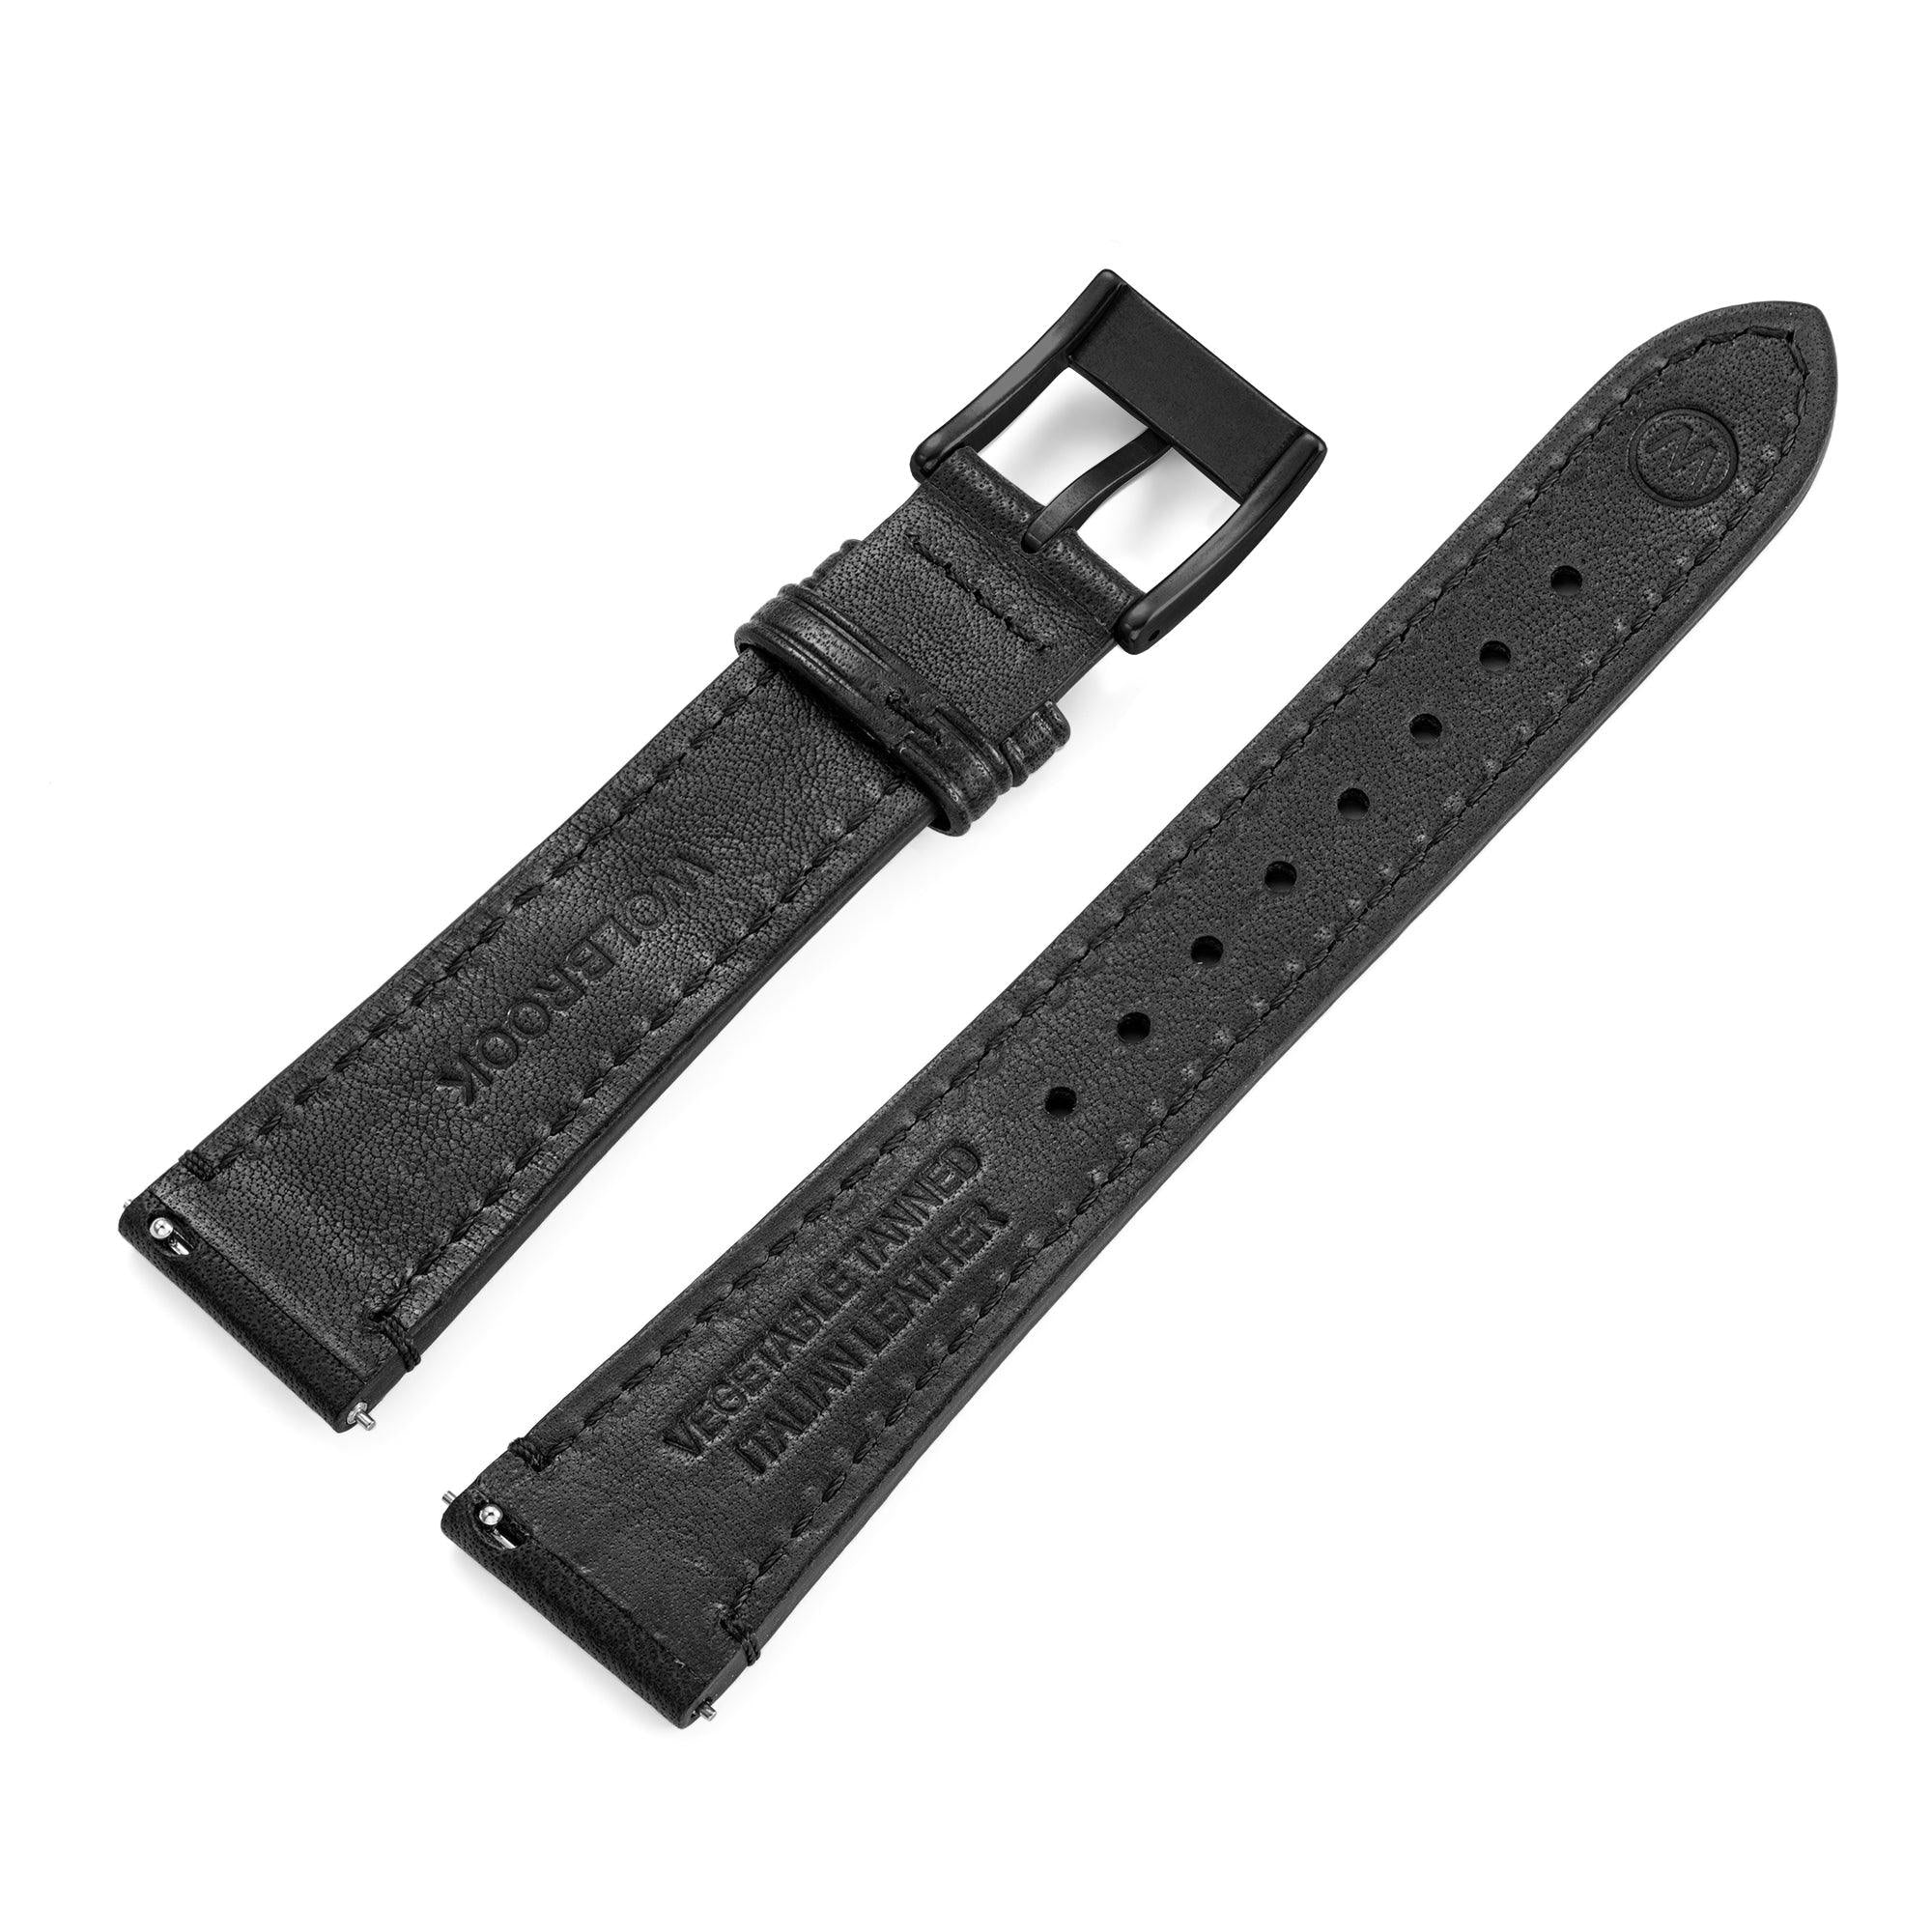 Two-Piece Black Leather Strap & Black PVD Buckle